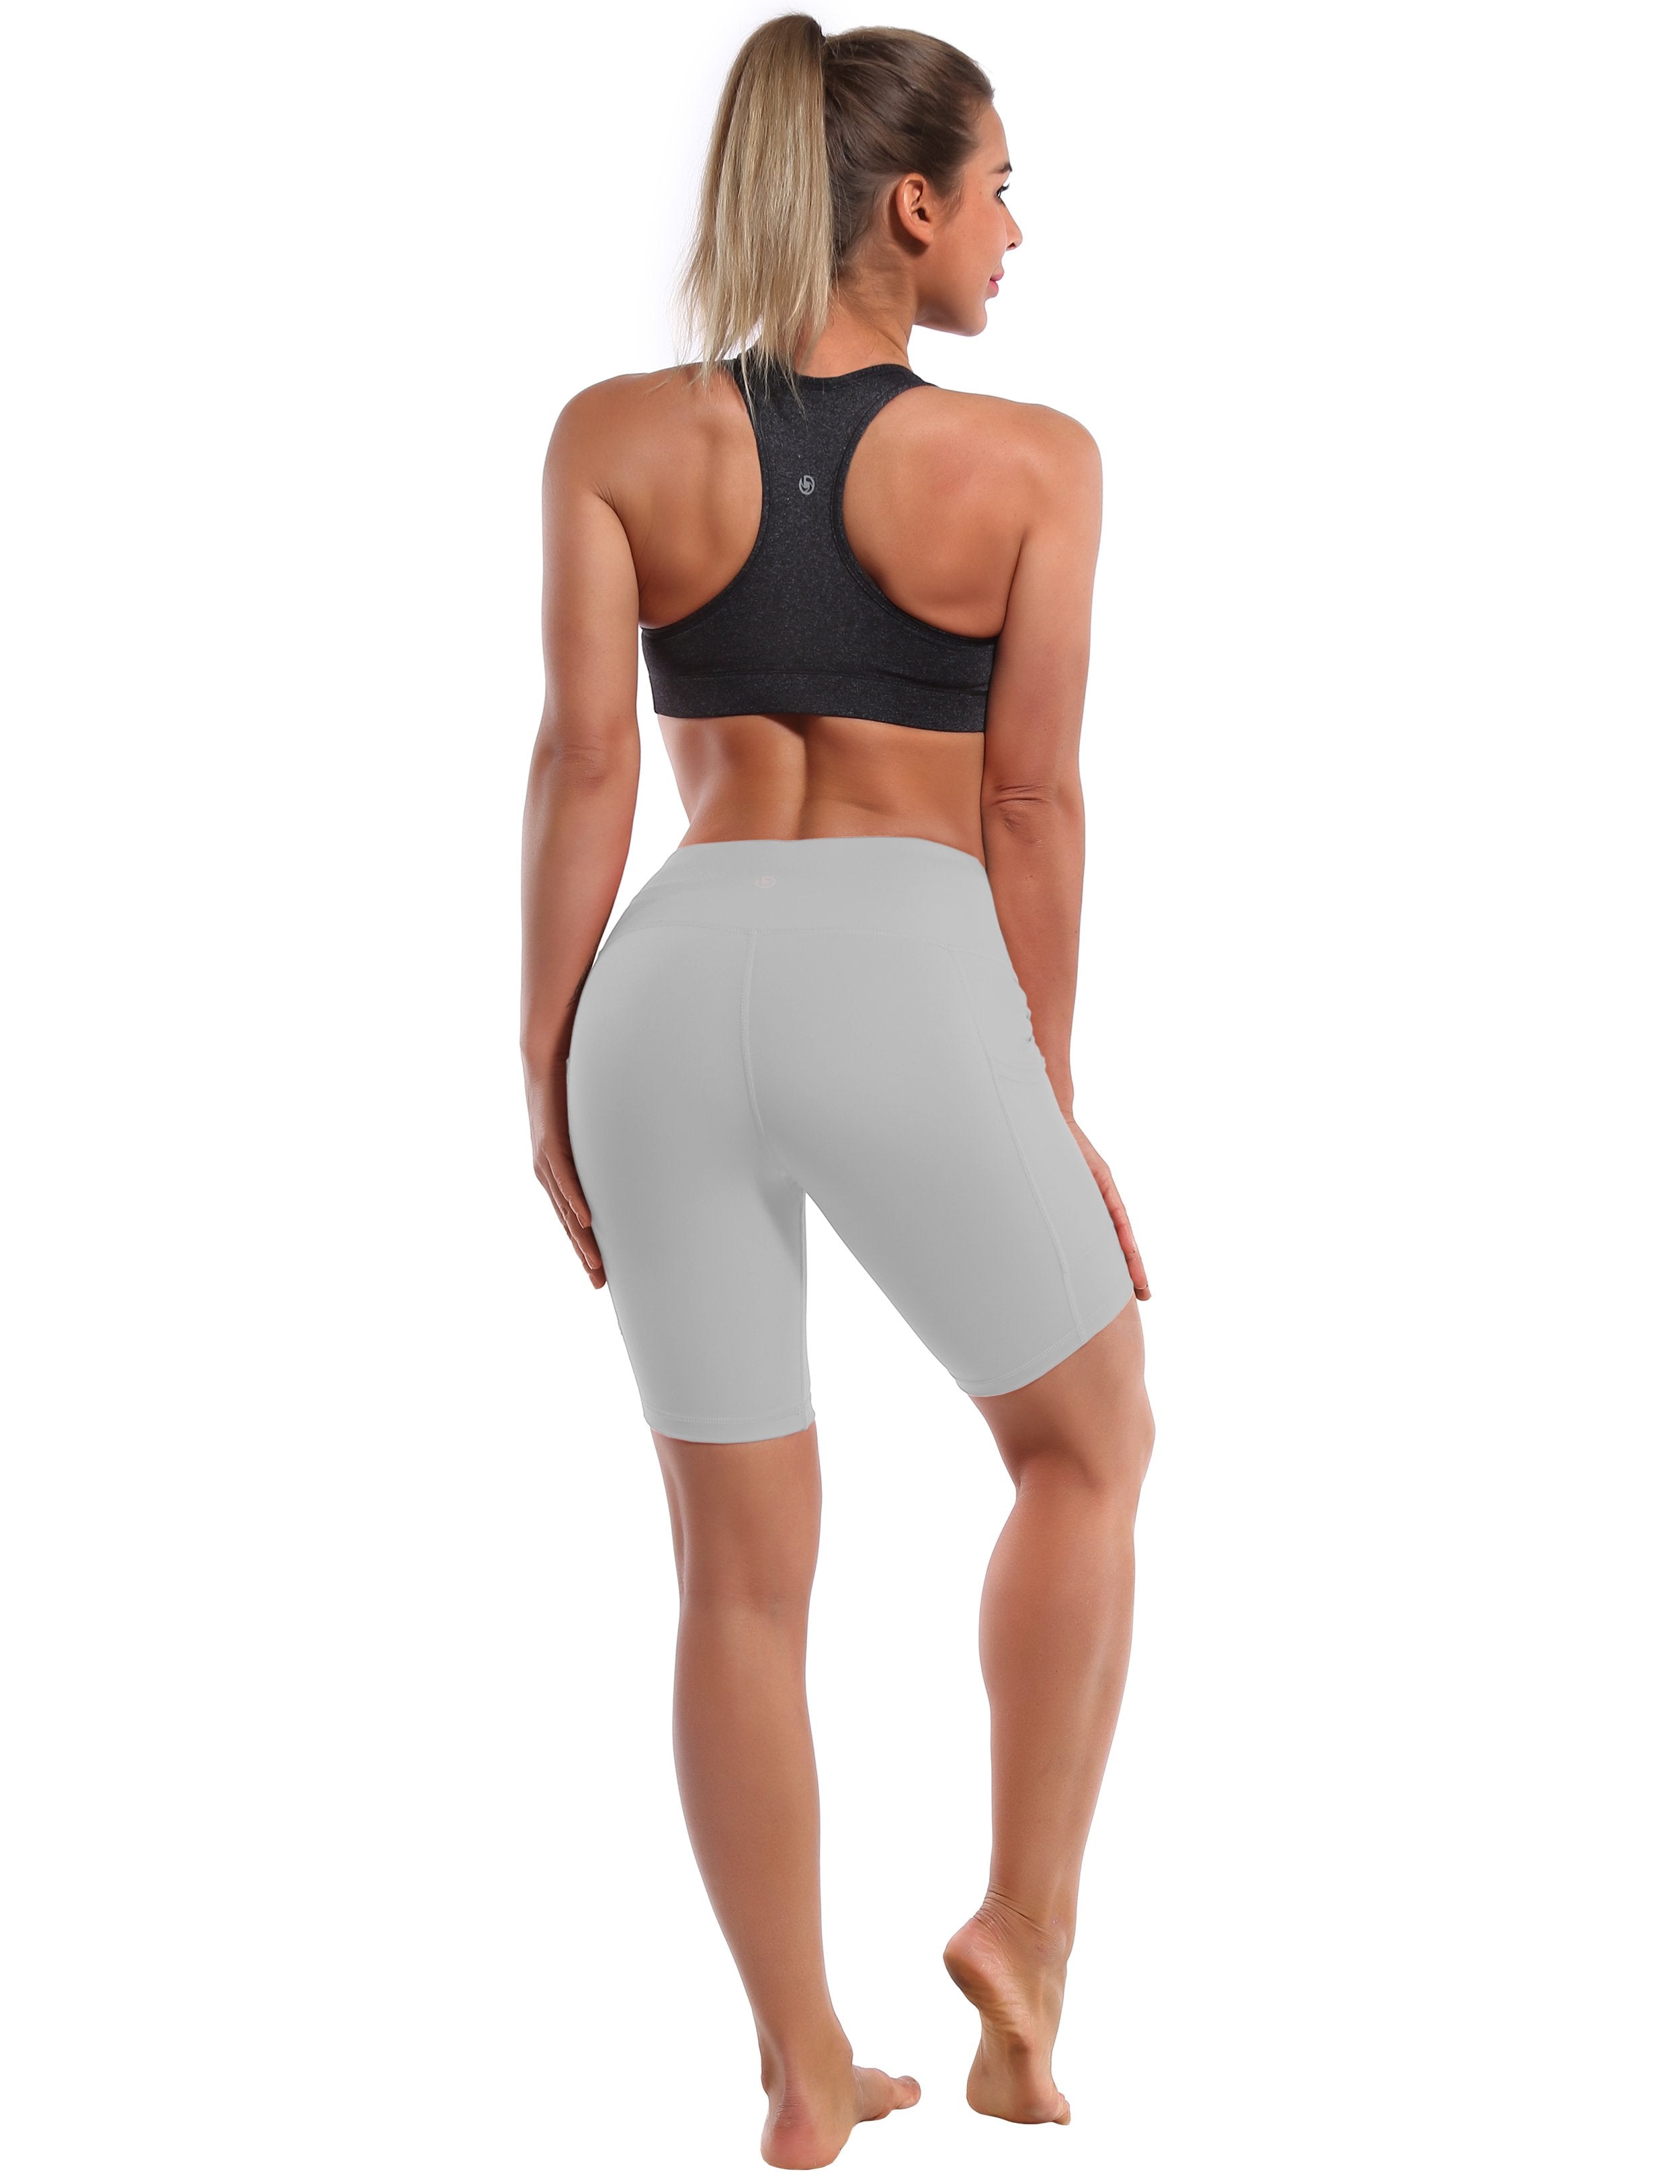 8" Side Pockets Pilates Shorts lightgray Sleek, soft, smooth and totally comfortable: our newest style is here. Softest-ever fabric High elasticity High density 4-way stretch Fabric doesn't attract lint easily No see-through Moisture-wicking Machine wash 75% Nylon, 25% Spandex